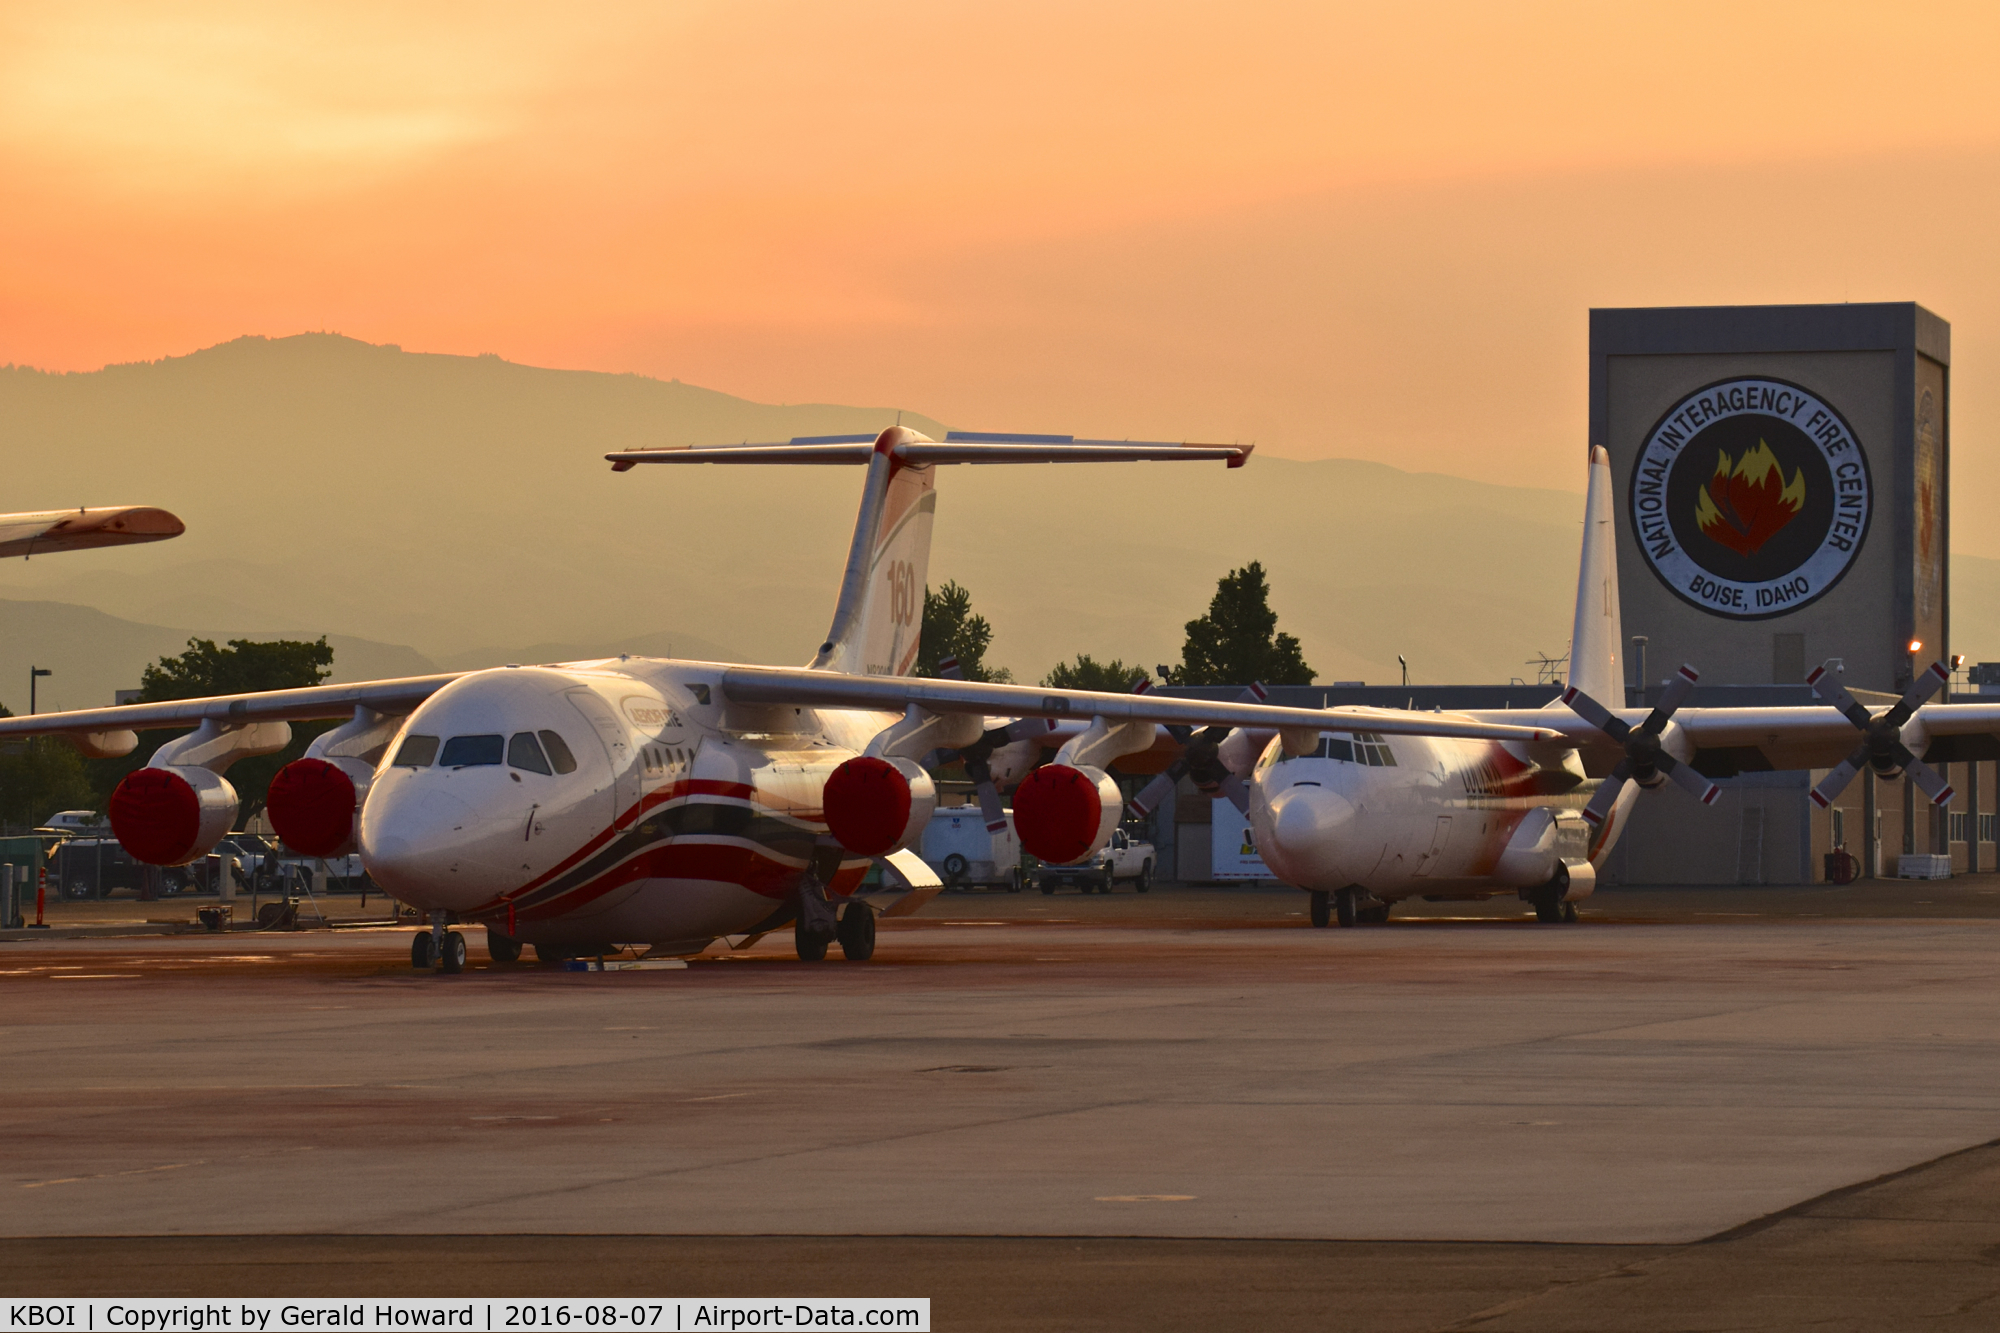 Boise Air Terminal/gowen Fld Airport (BOI) - Early morning on the National Interagency Fire Center ramp.